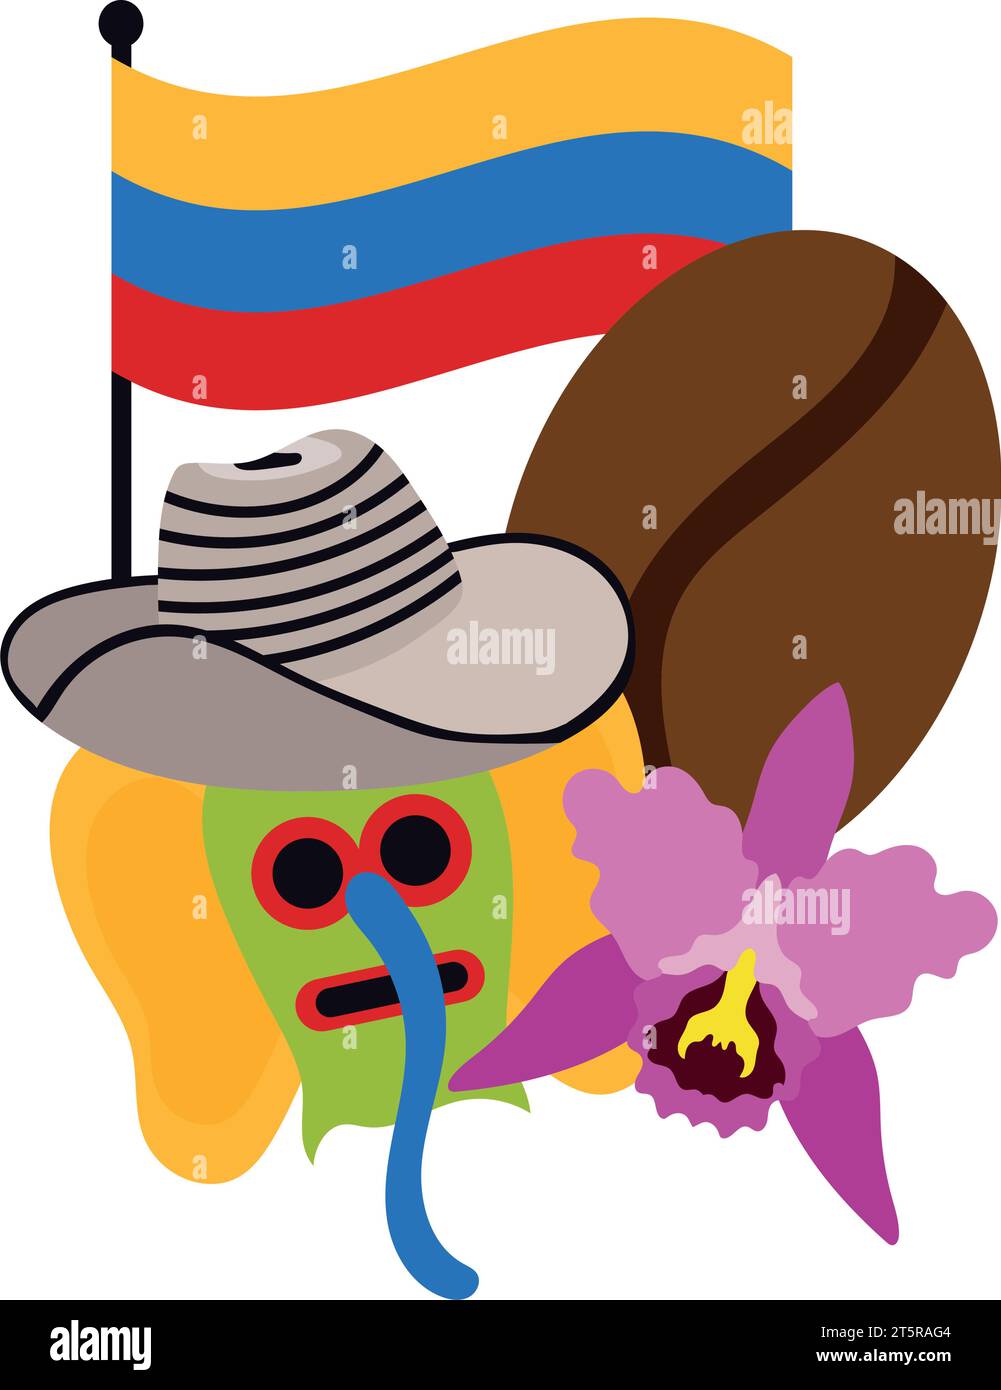 colombian culture things vector isolated Stock Vector